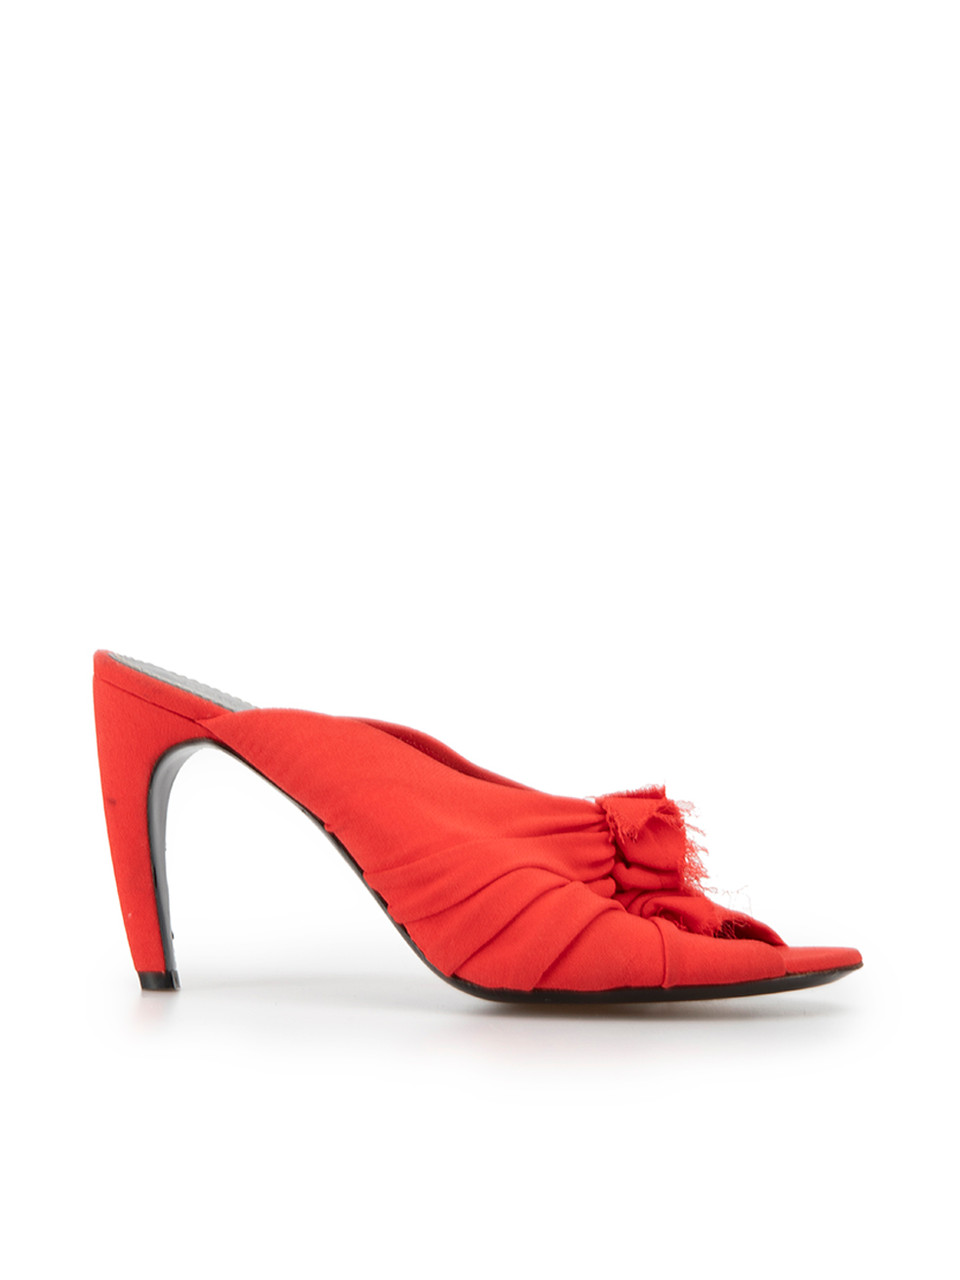 Proenza Schouler Red Gathered Frayed Sandals